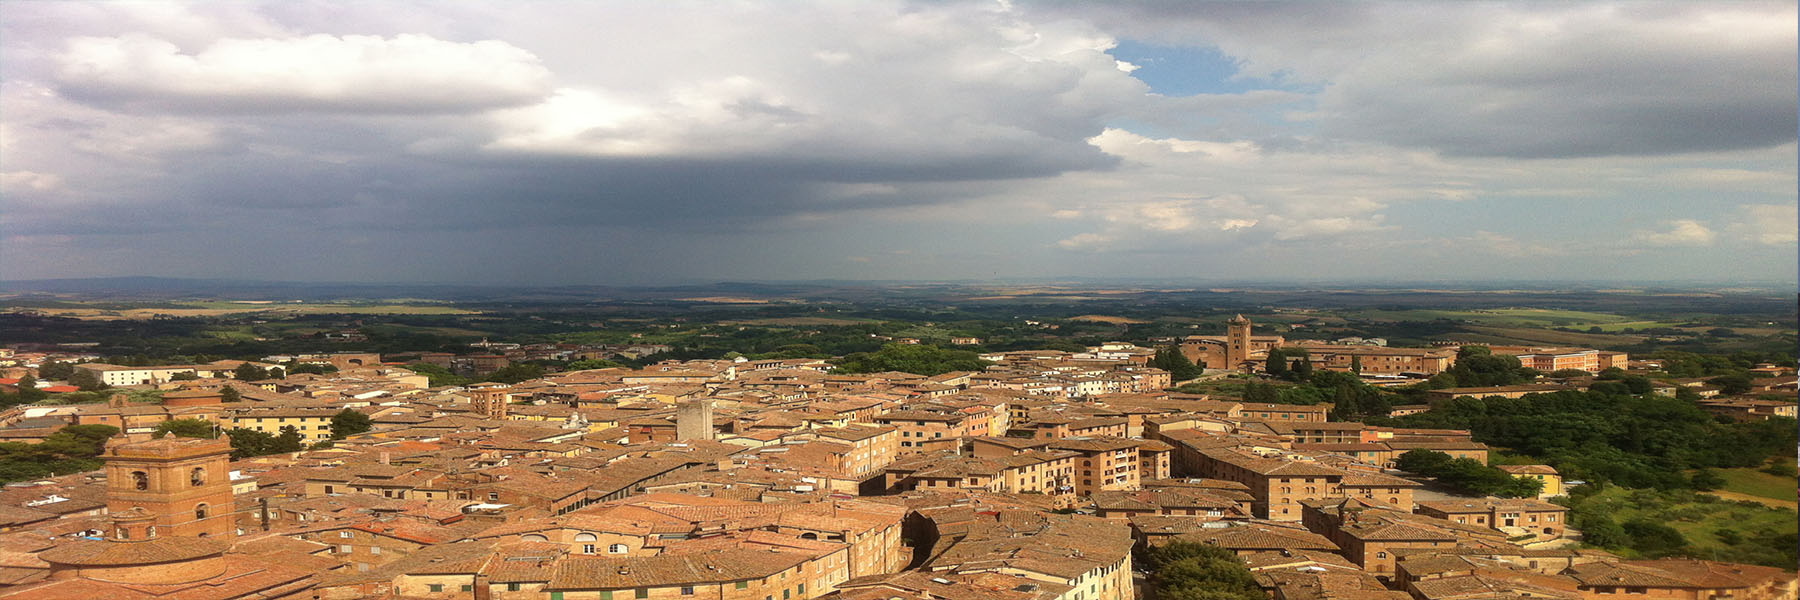 Panoramic view overlooking small city and countryside.